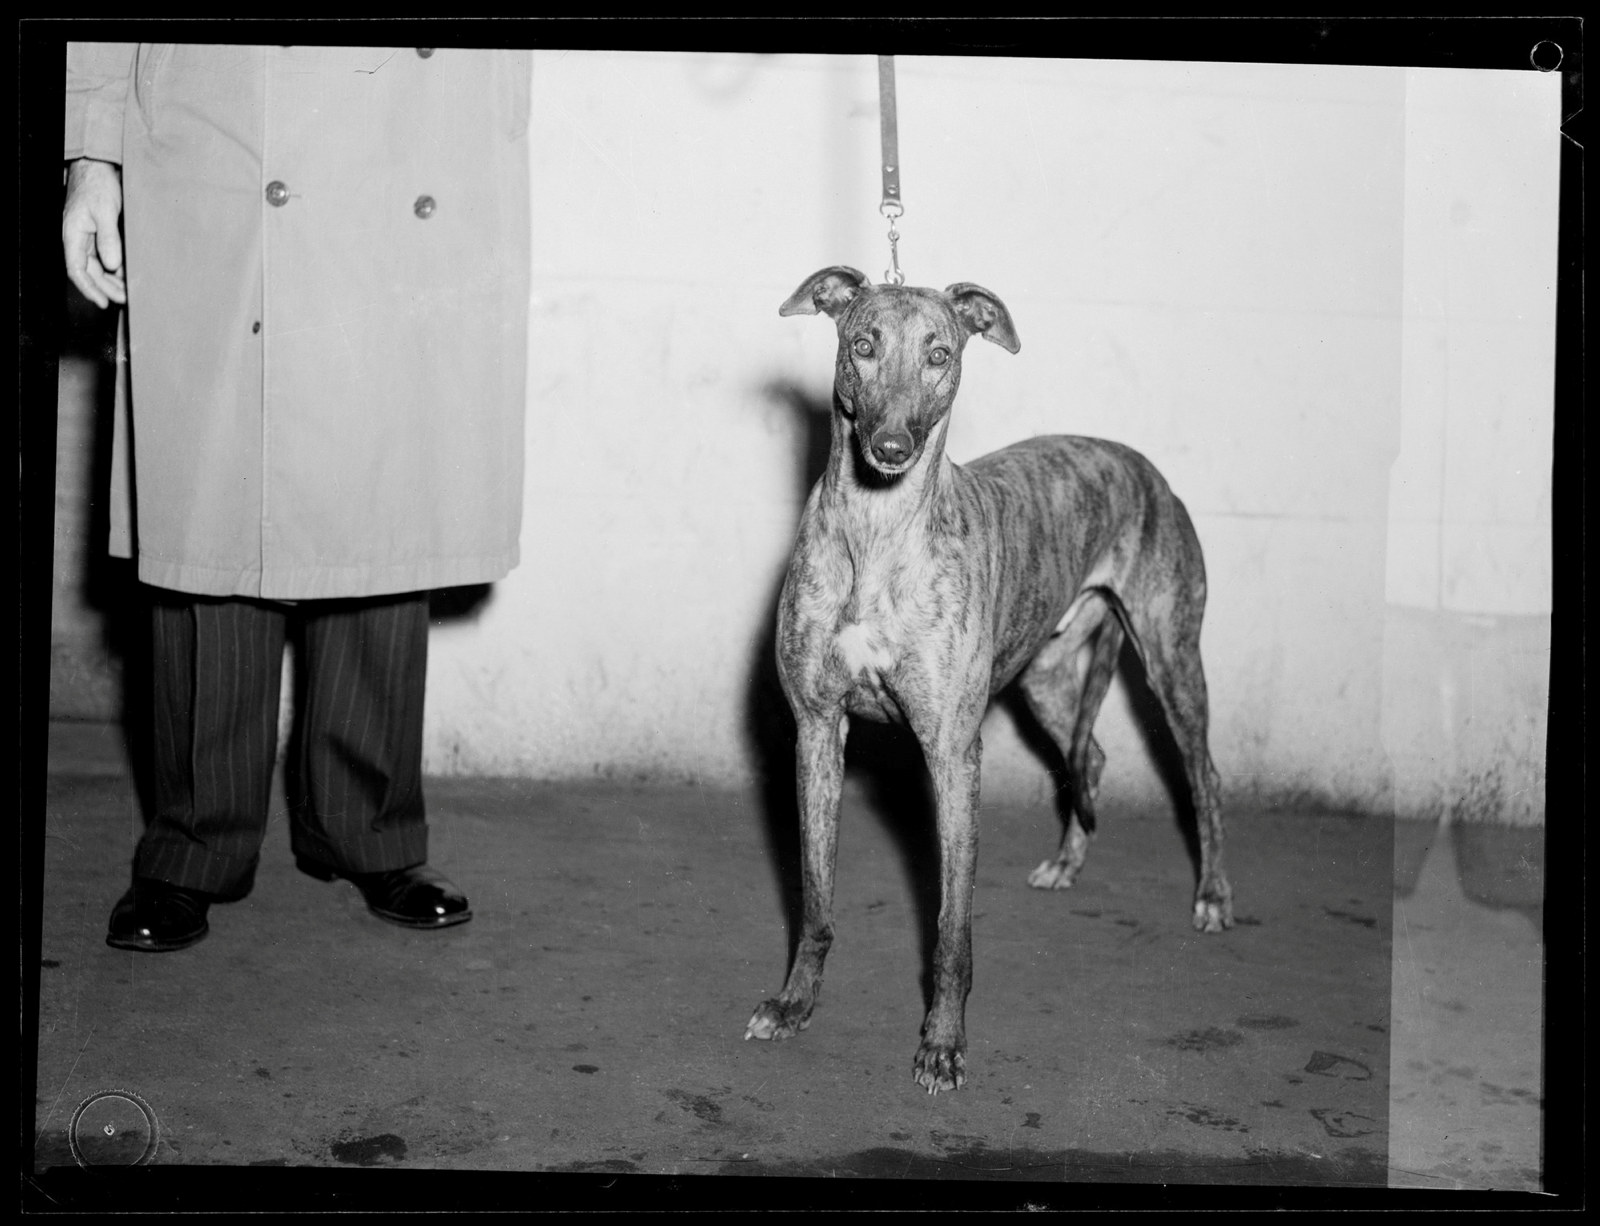 Black and white photo of greyhound on leash being held by man, whose coat and trousers are all that is visible.